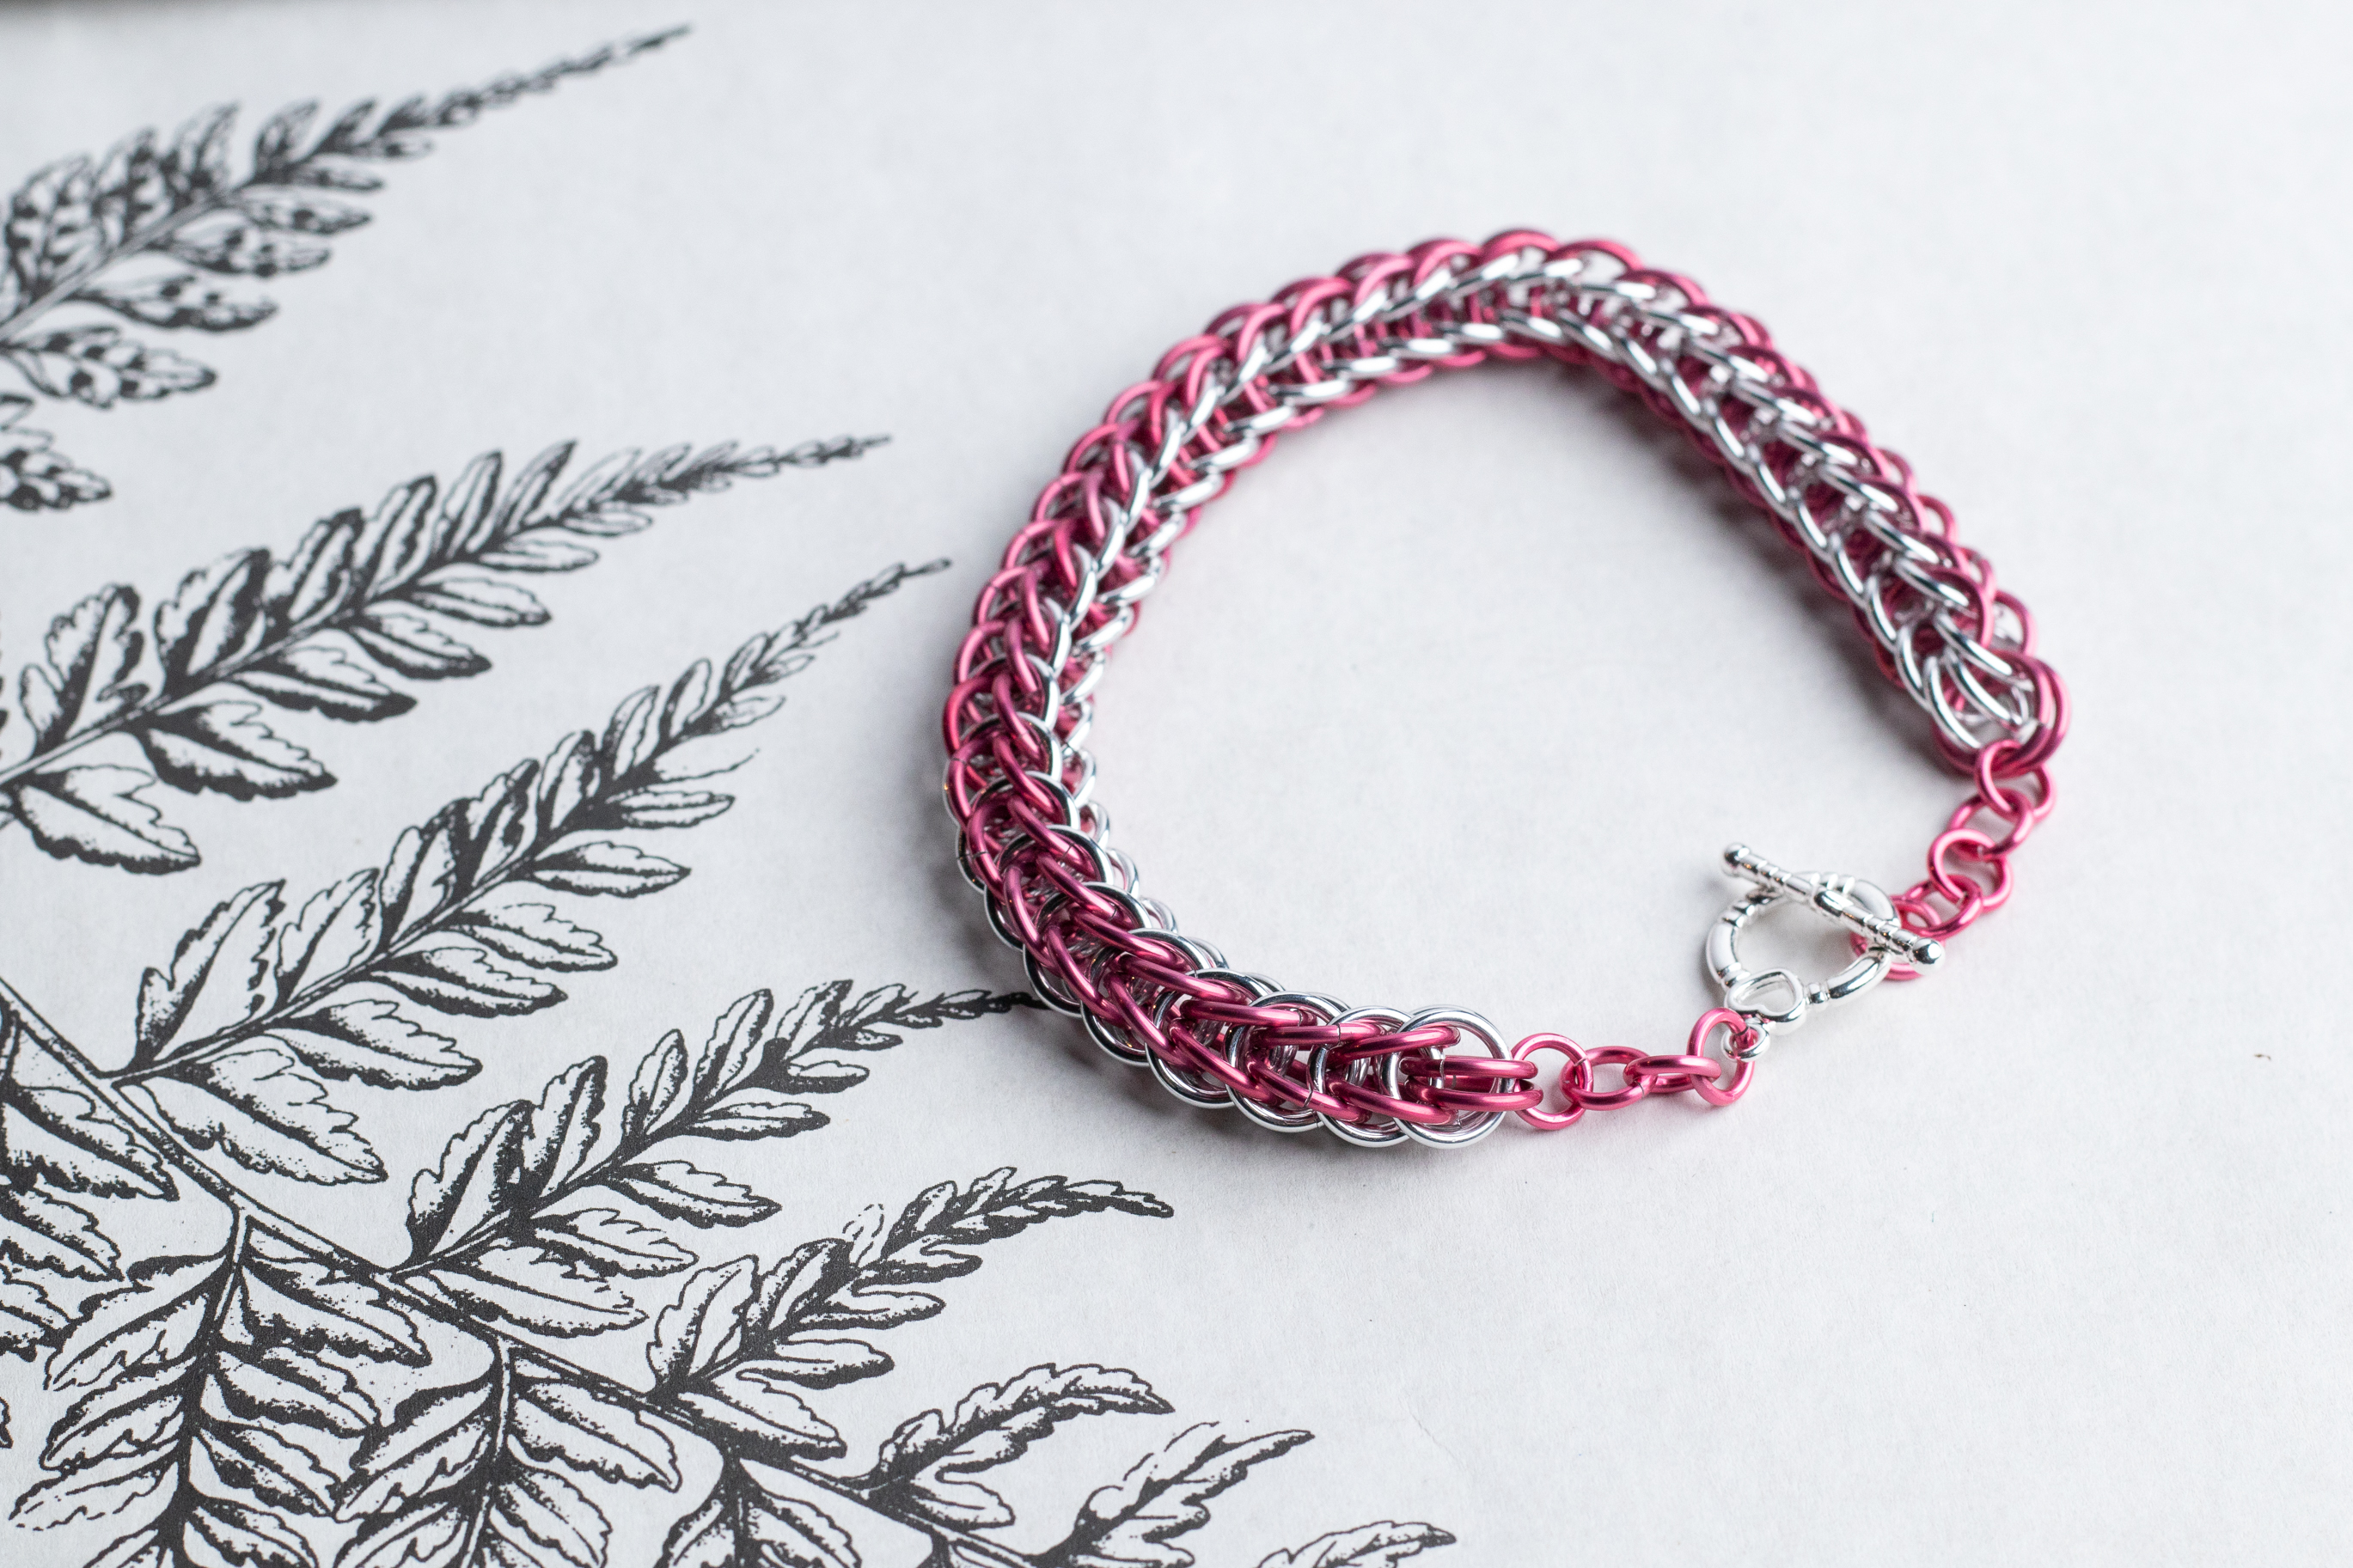 A pink and silver chain bracelet on a white background.